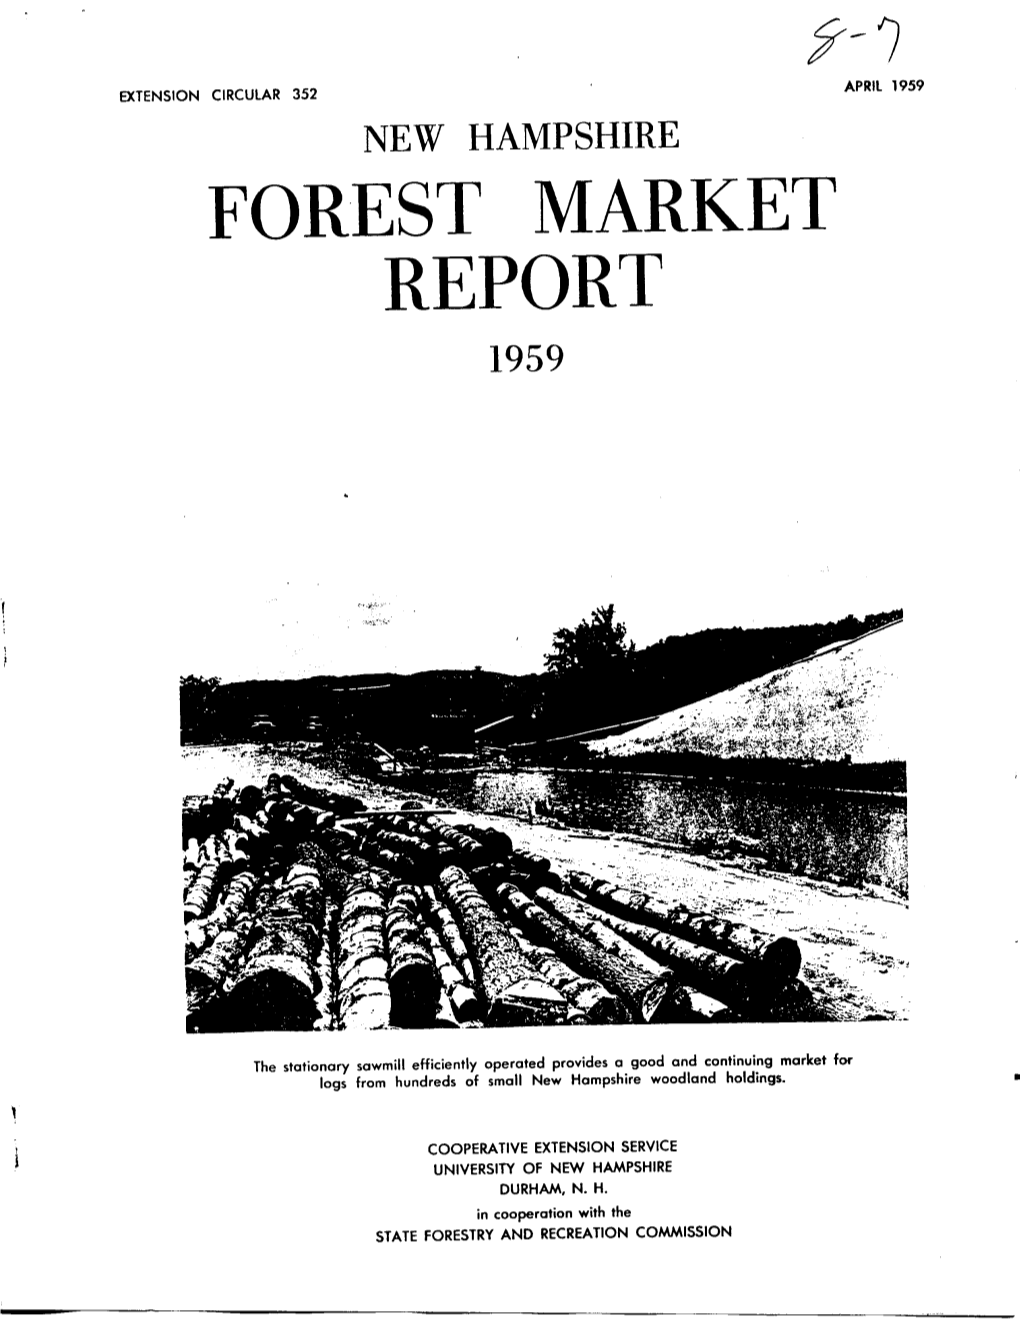 Forest Market Report 1959